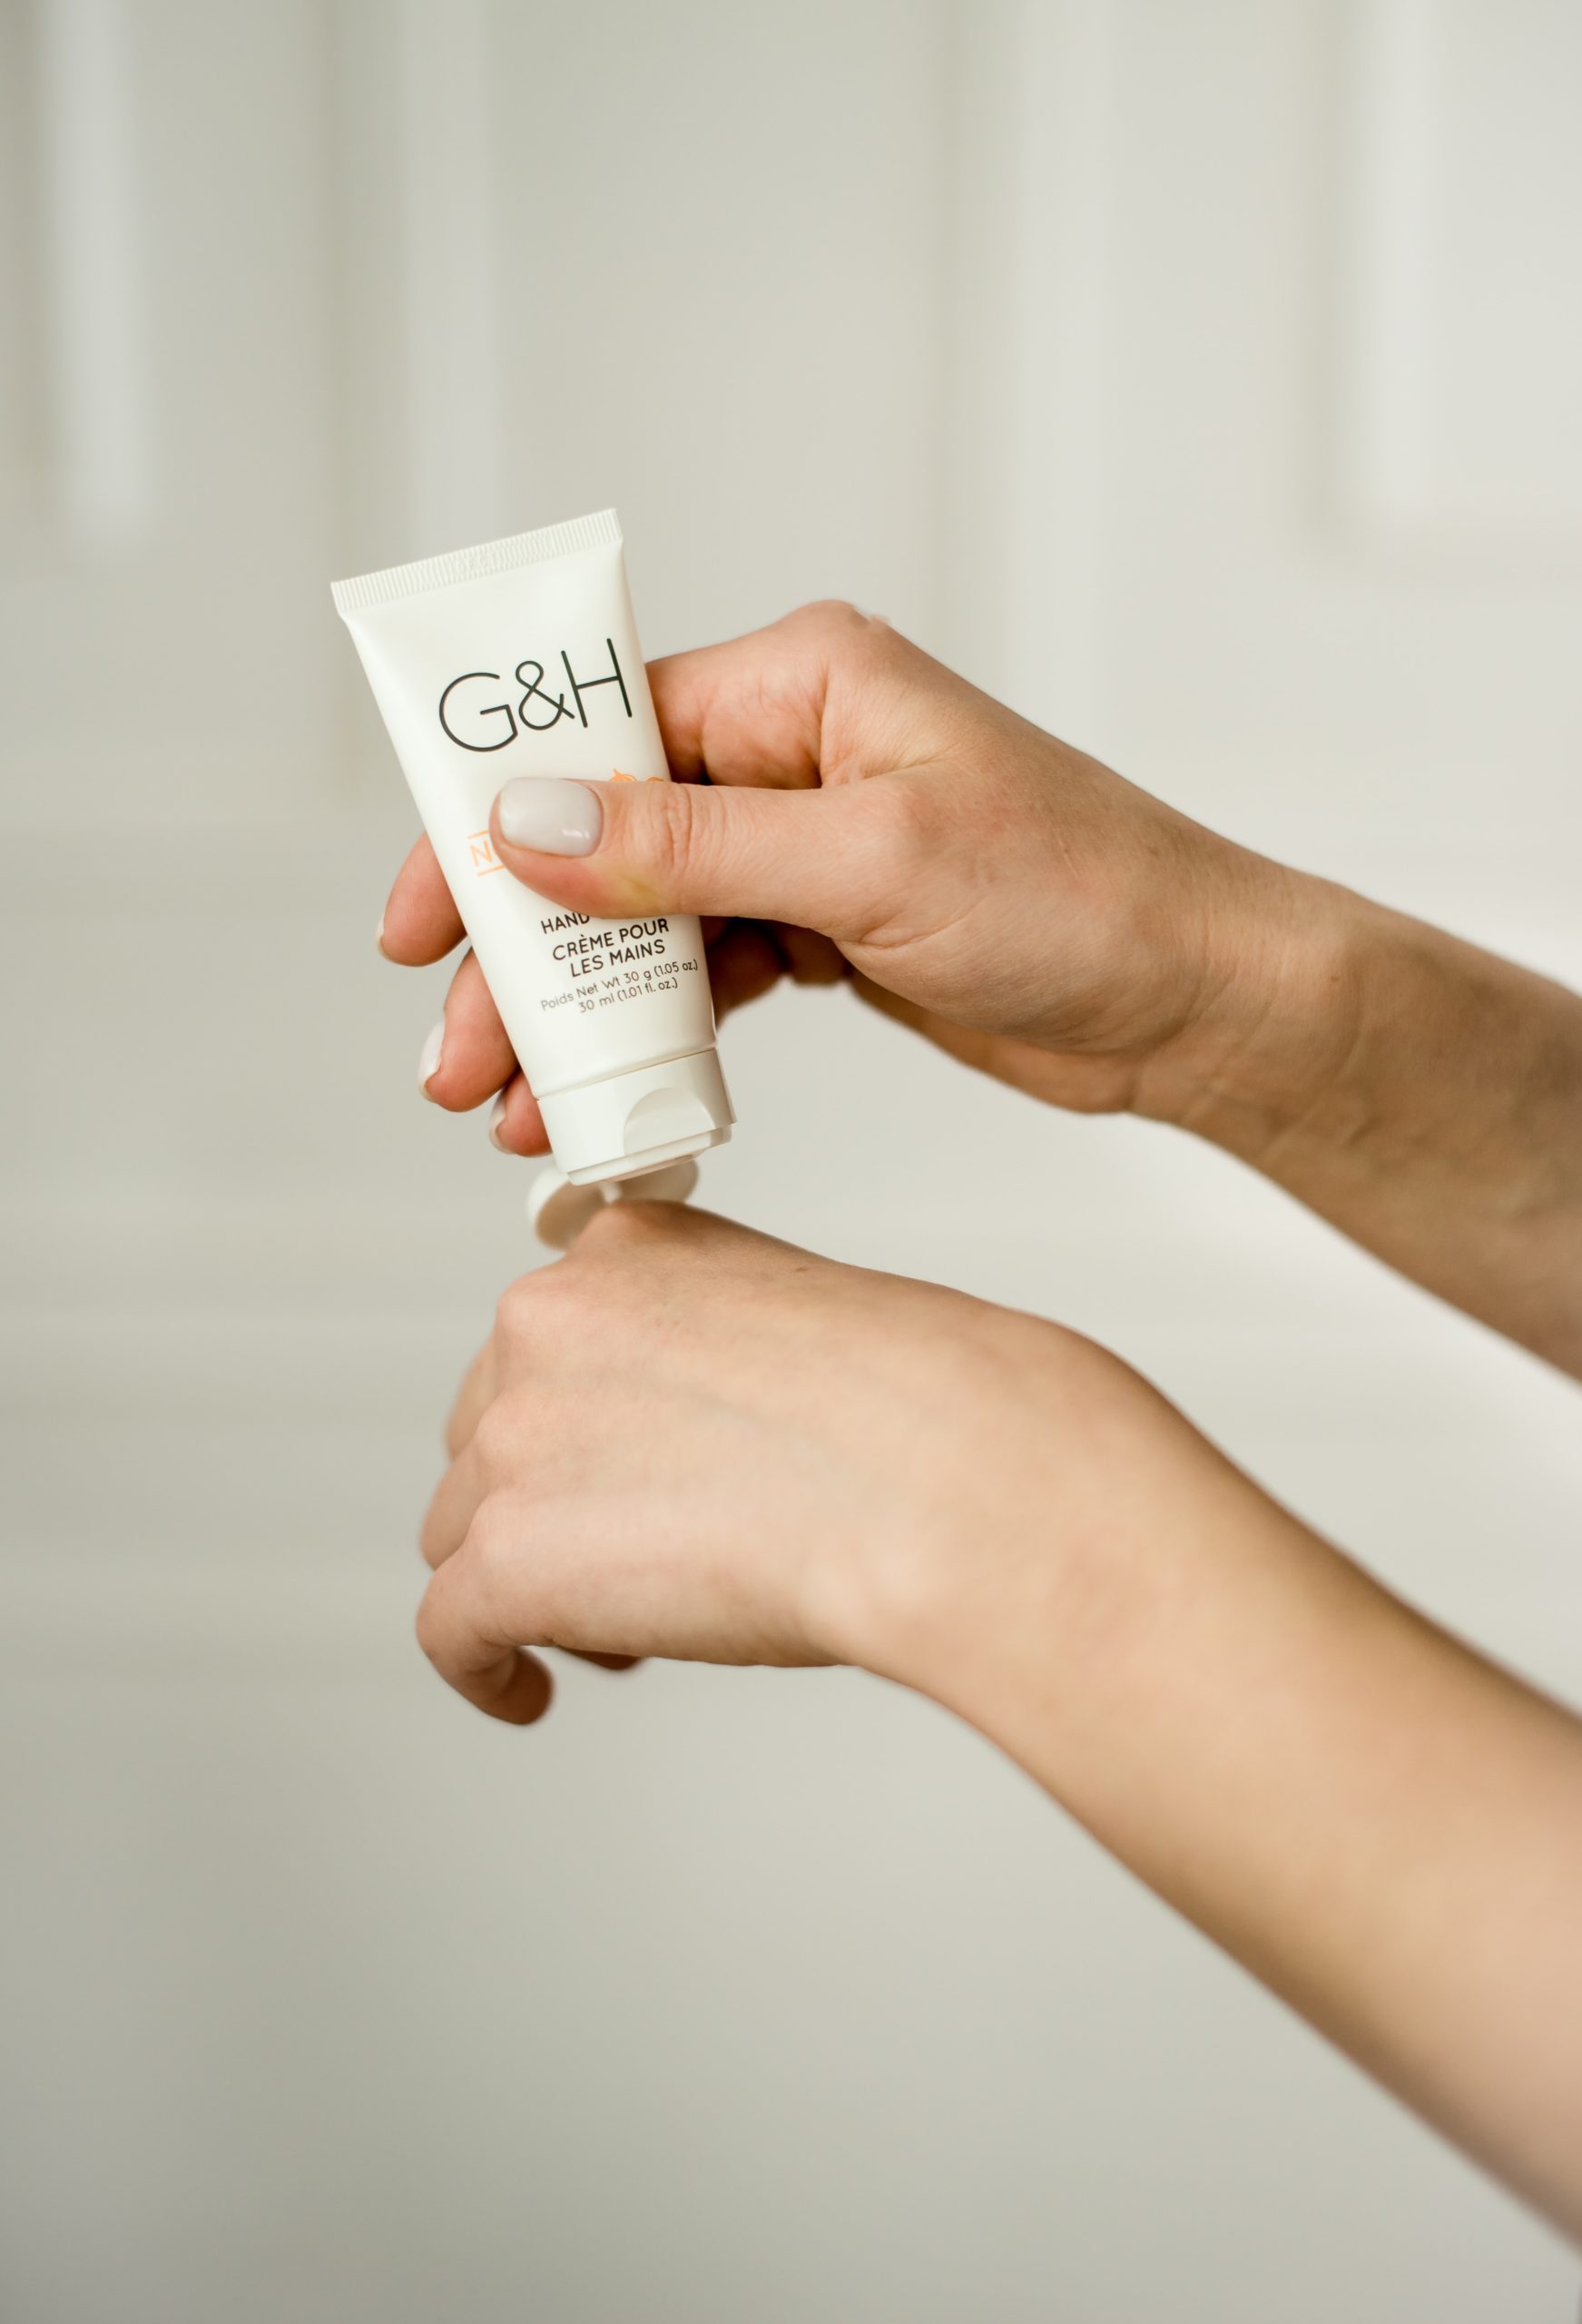 Person applying hand cream from small squeezable container against plain cream background